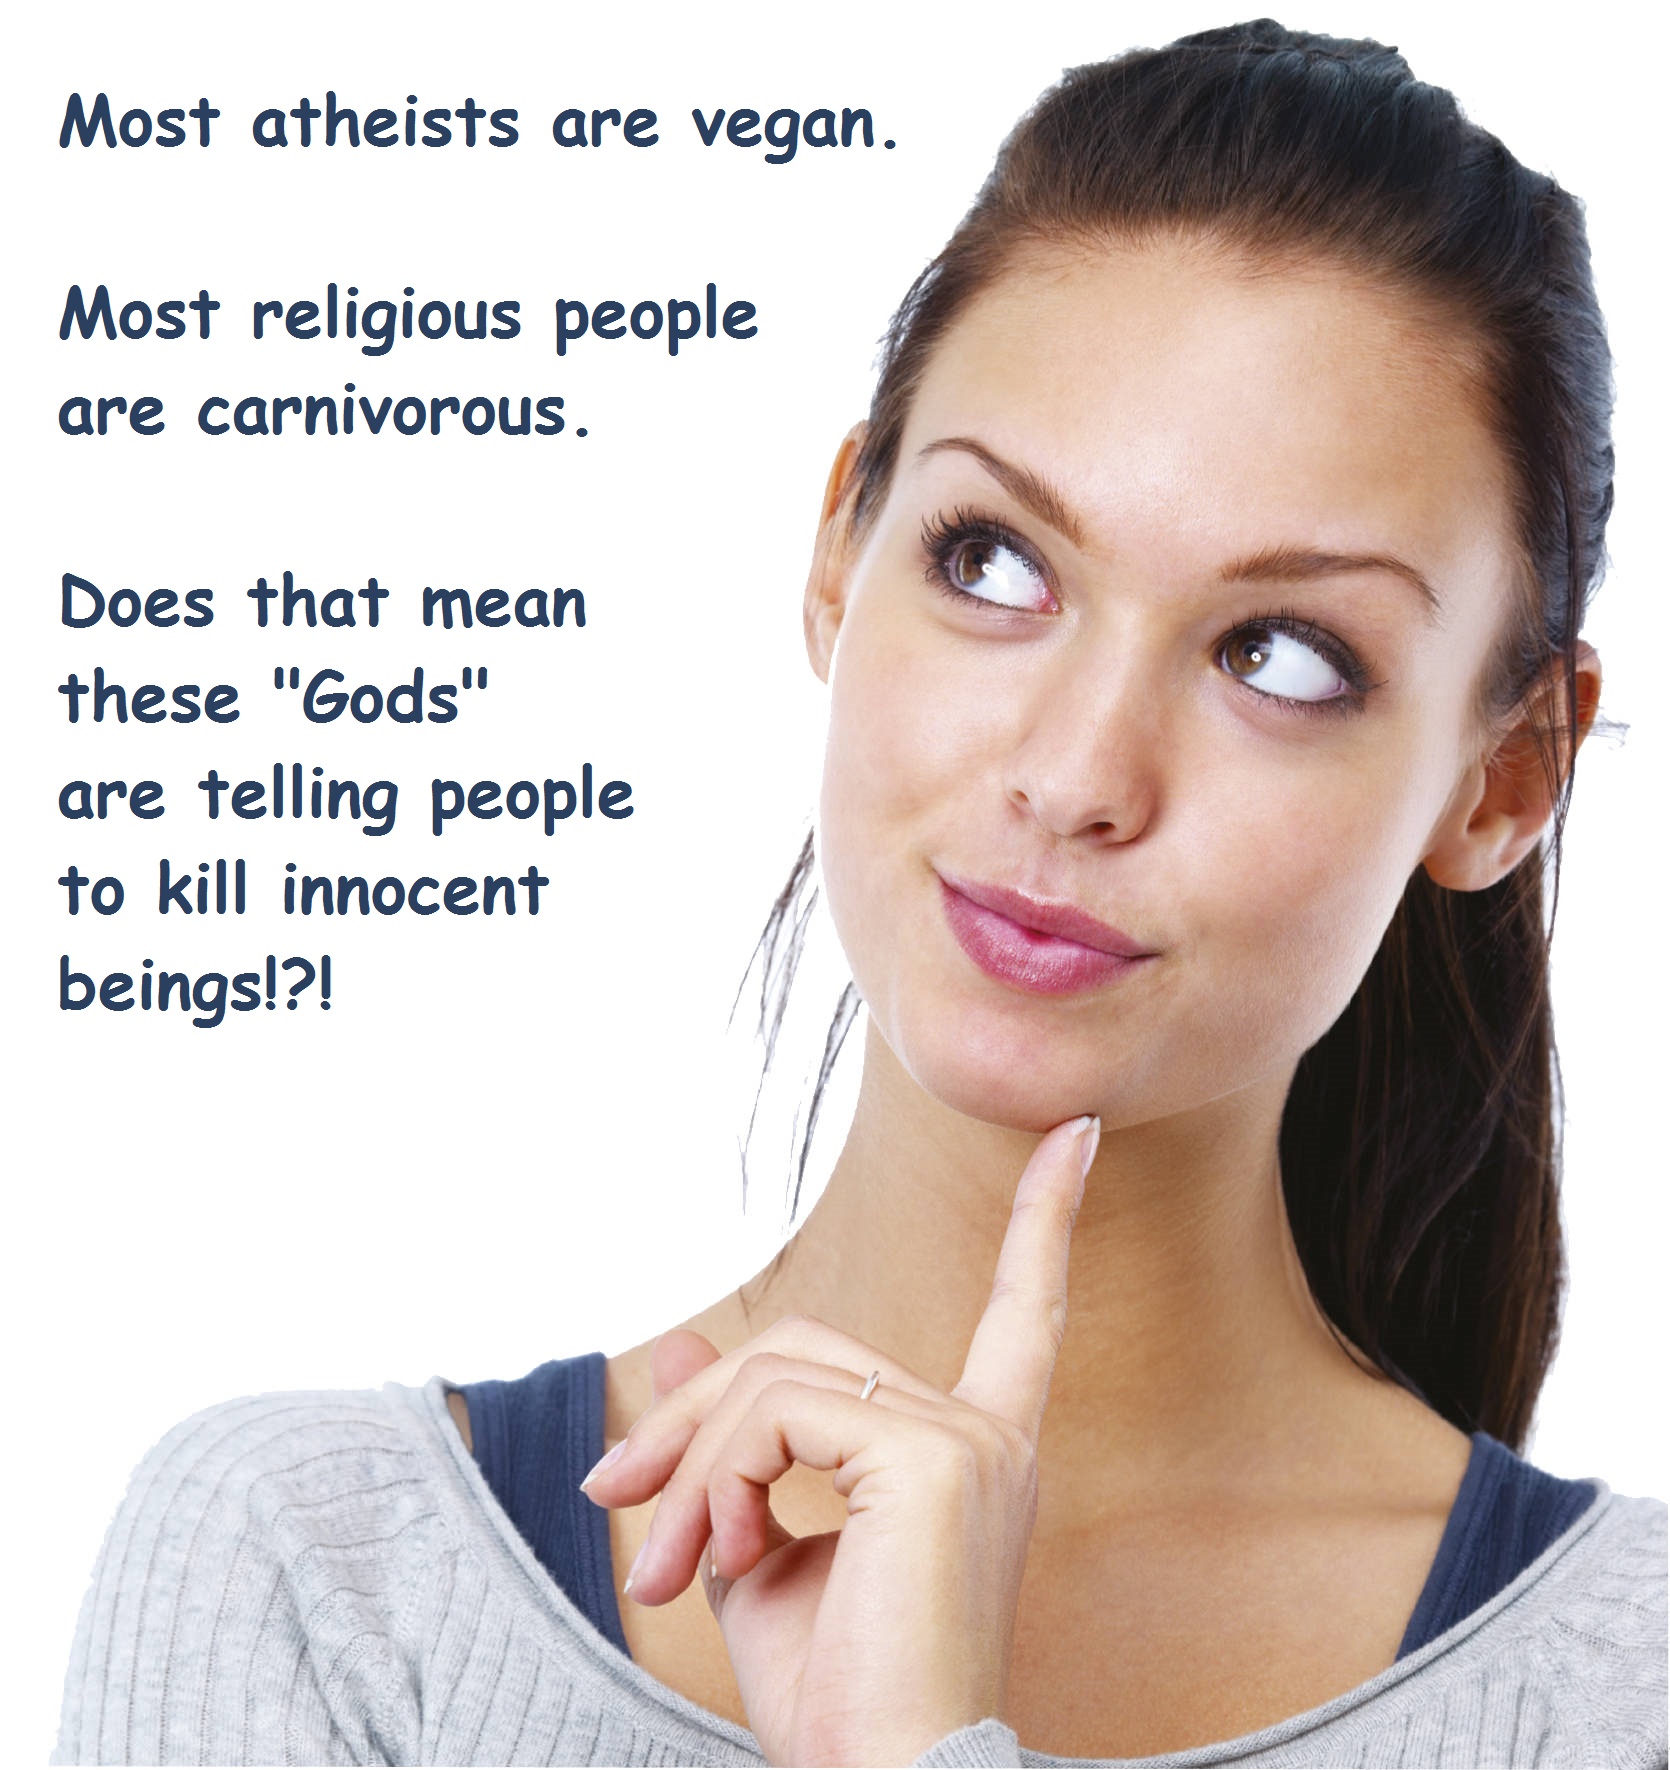 Most atheists are vegan. Most religious people are carnivorous. Does that mean that these "Gods" are telling people to kill innocent beings!?!